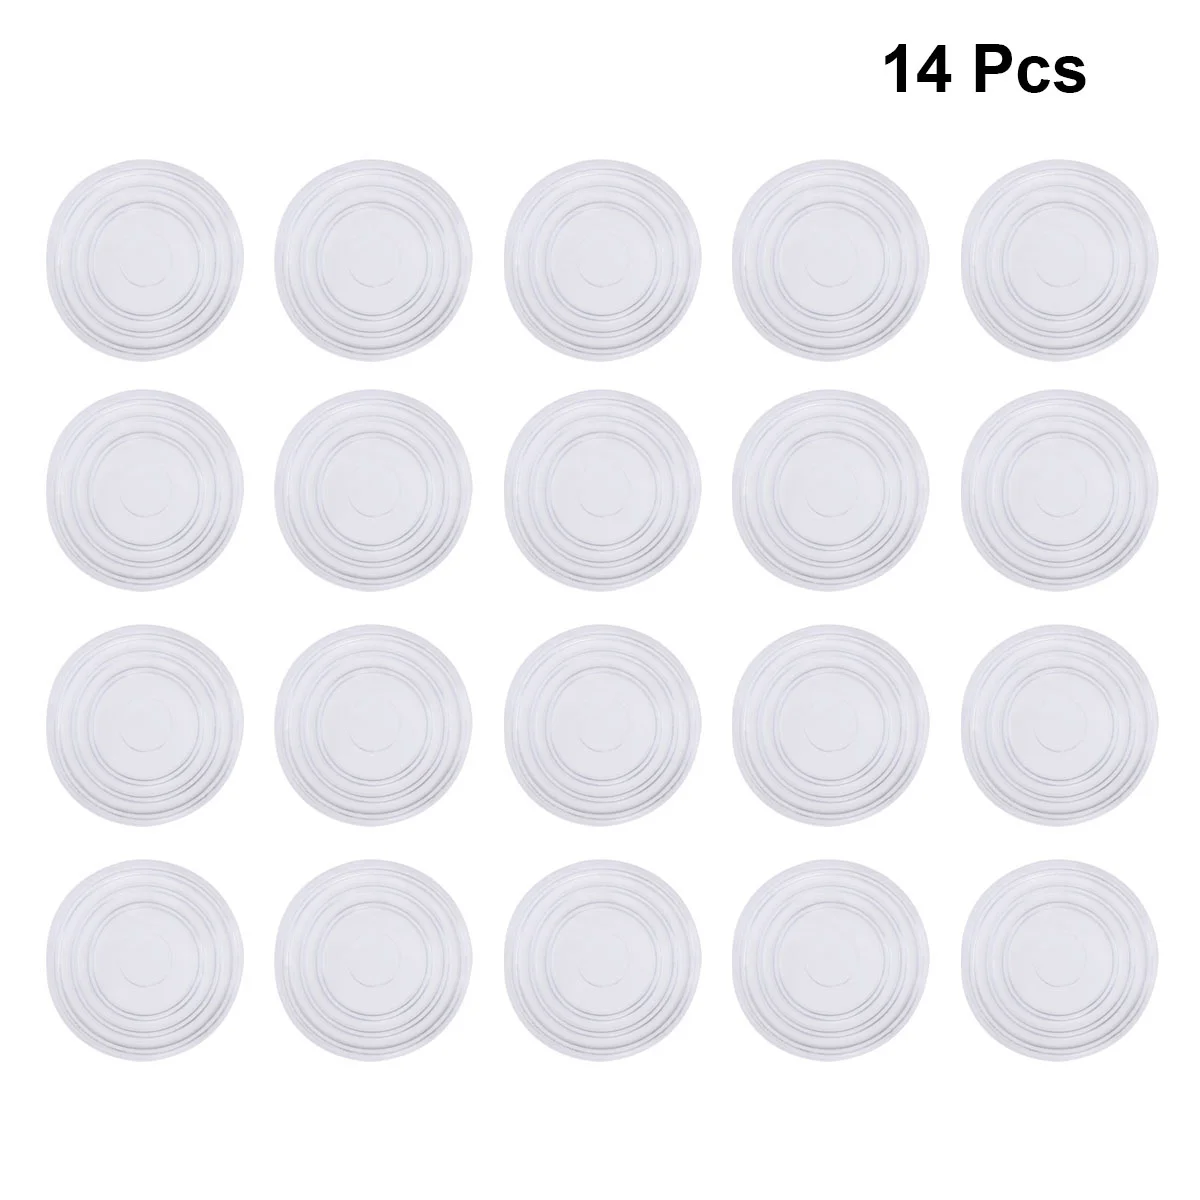 

18 Furniture Bumpers Round Glass Table Pads Clear Adhesive Bumper Pads Round Shape Non Grip Pads Glass TableRubber Feet Buffer